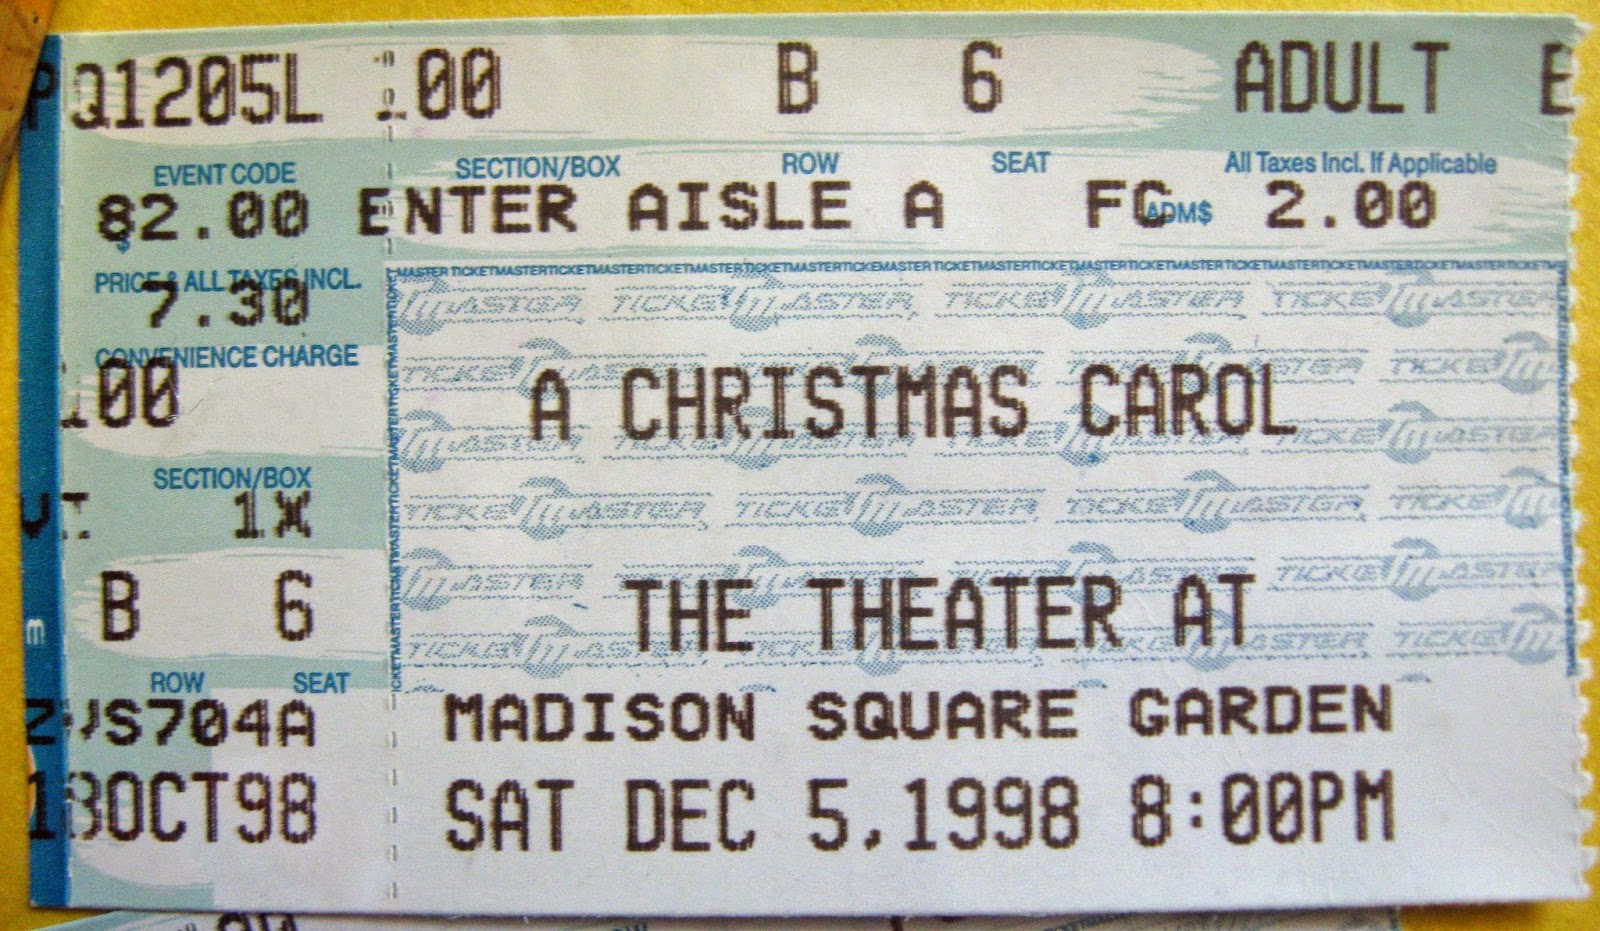 My ticket stub to see Roger Daltrey as Scrooge Dec 5, 1998 at MSG